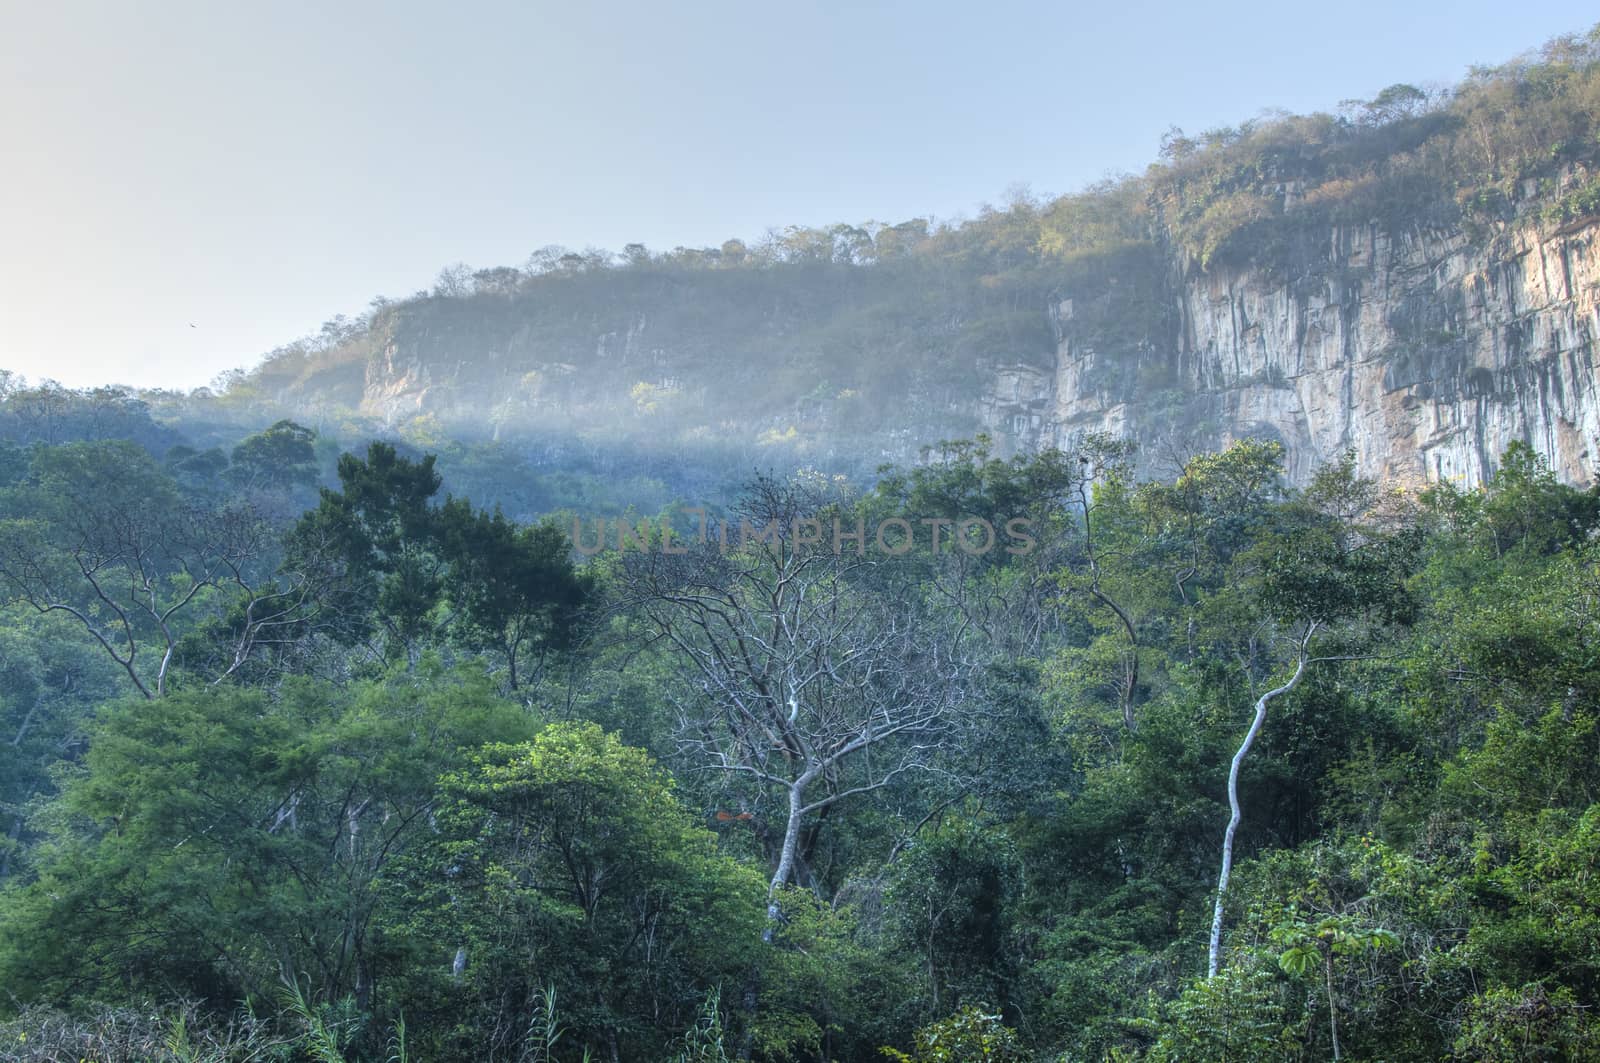 First light of day illuminates top of canyon above dense tropical forest in Cañon La Venta, Chiapas, Mexico